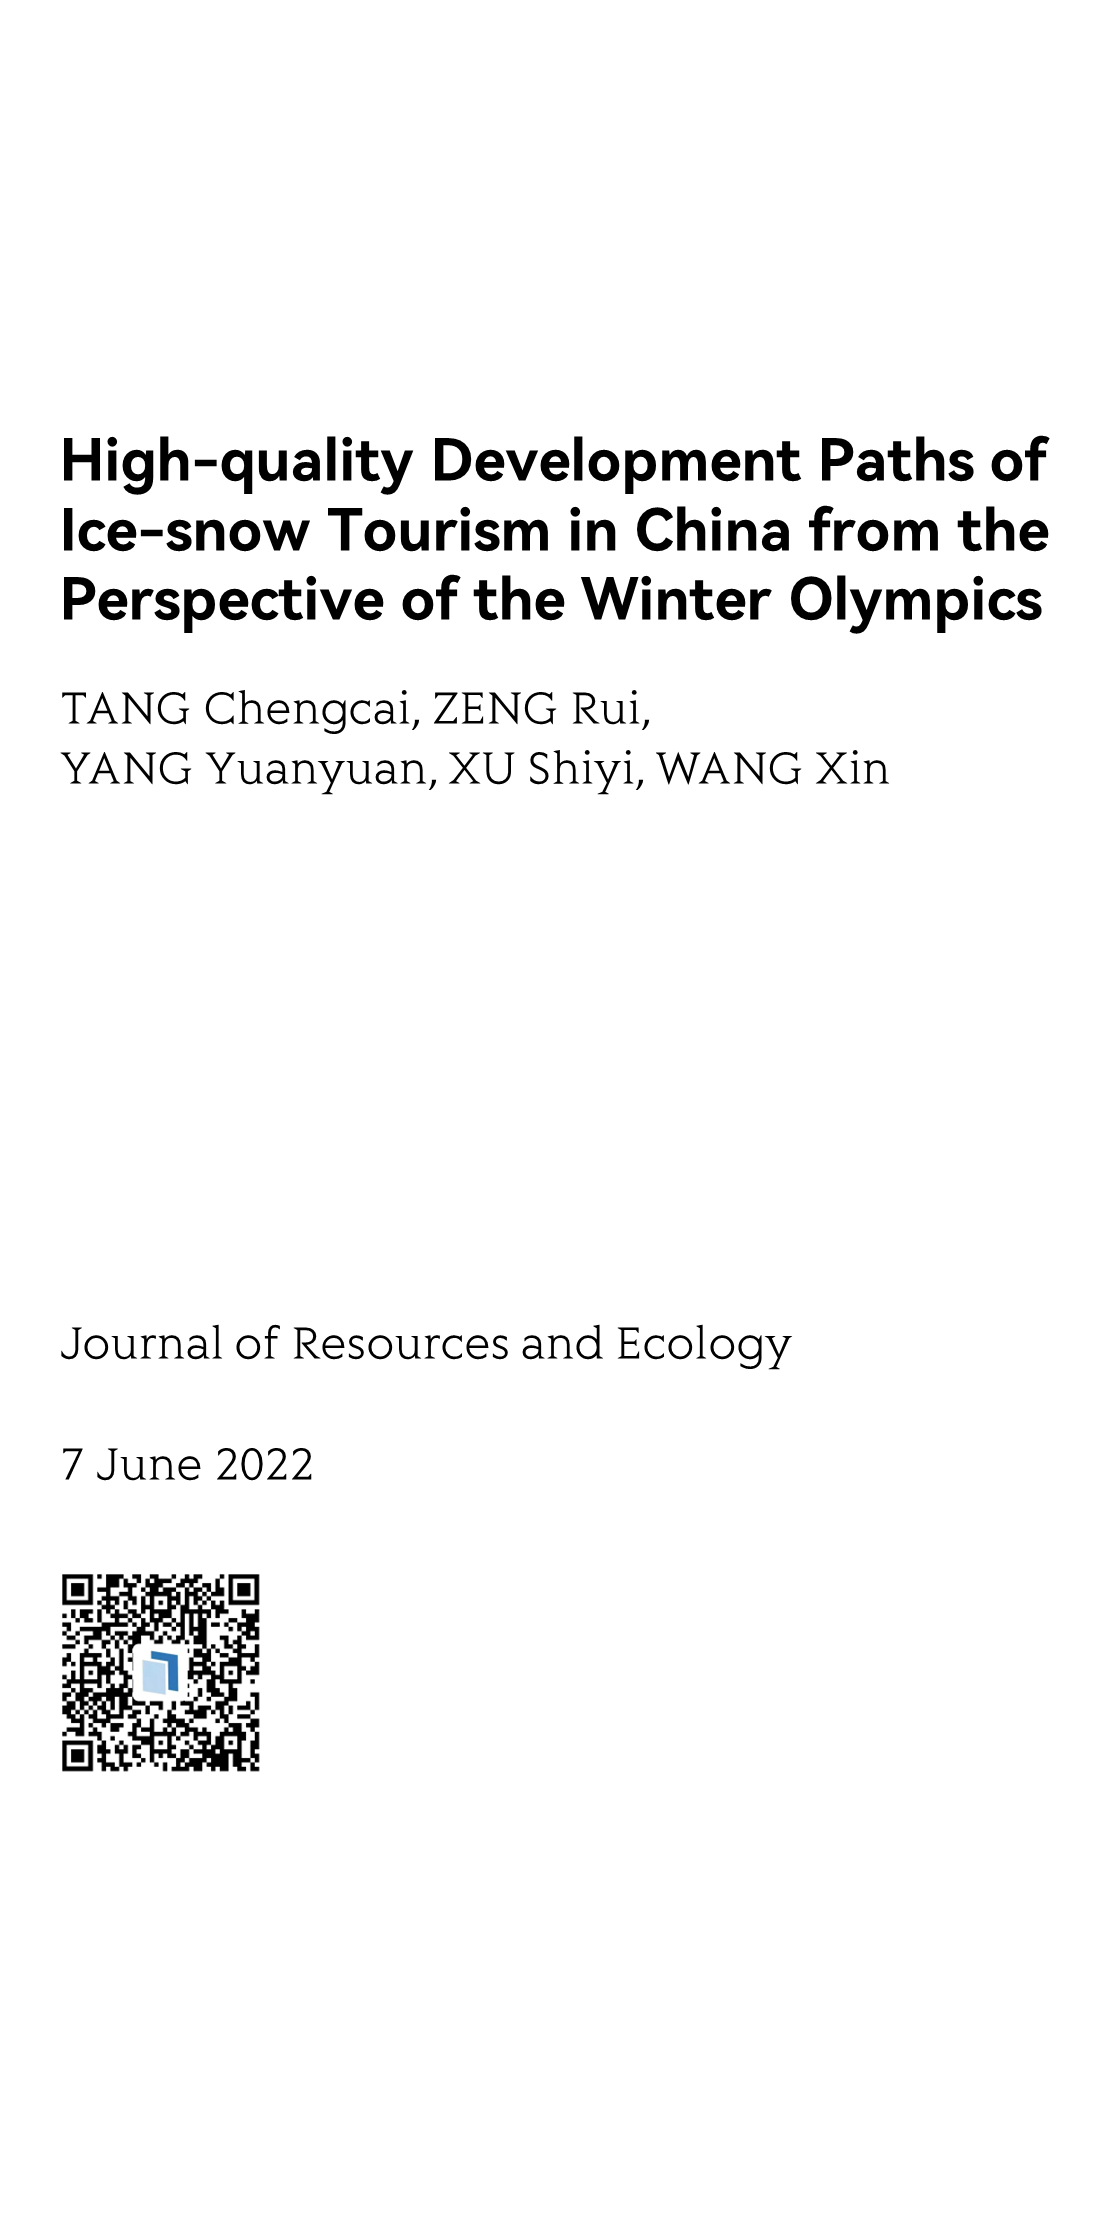 High-quality Development Paths of Ice-snow Tourism in China from the Perspective of the Winter Olympics_1